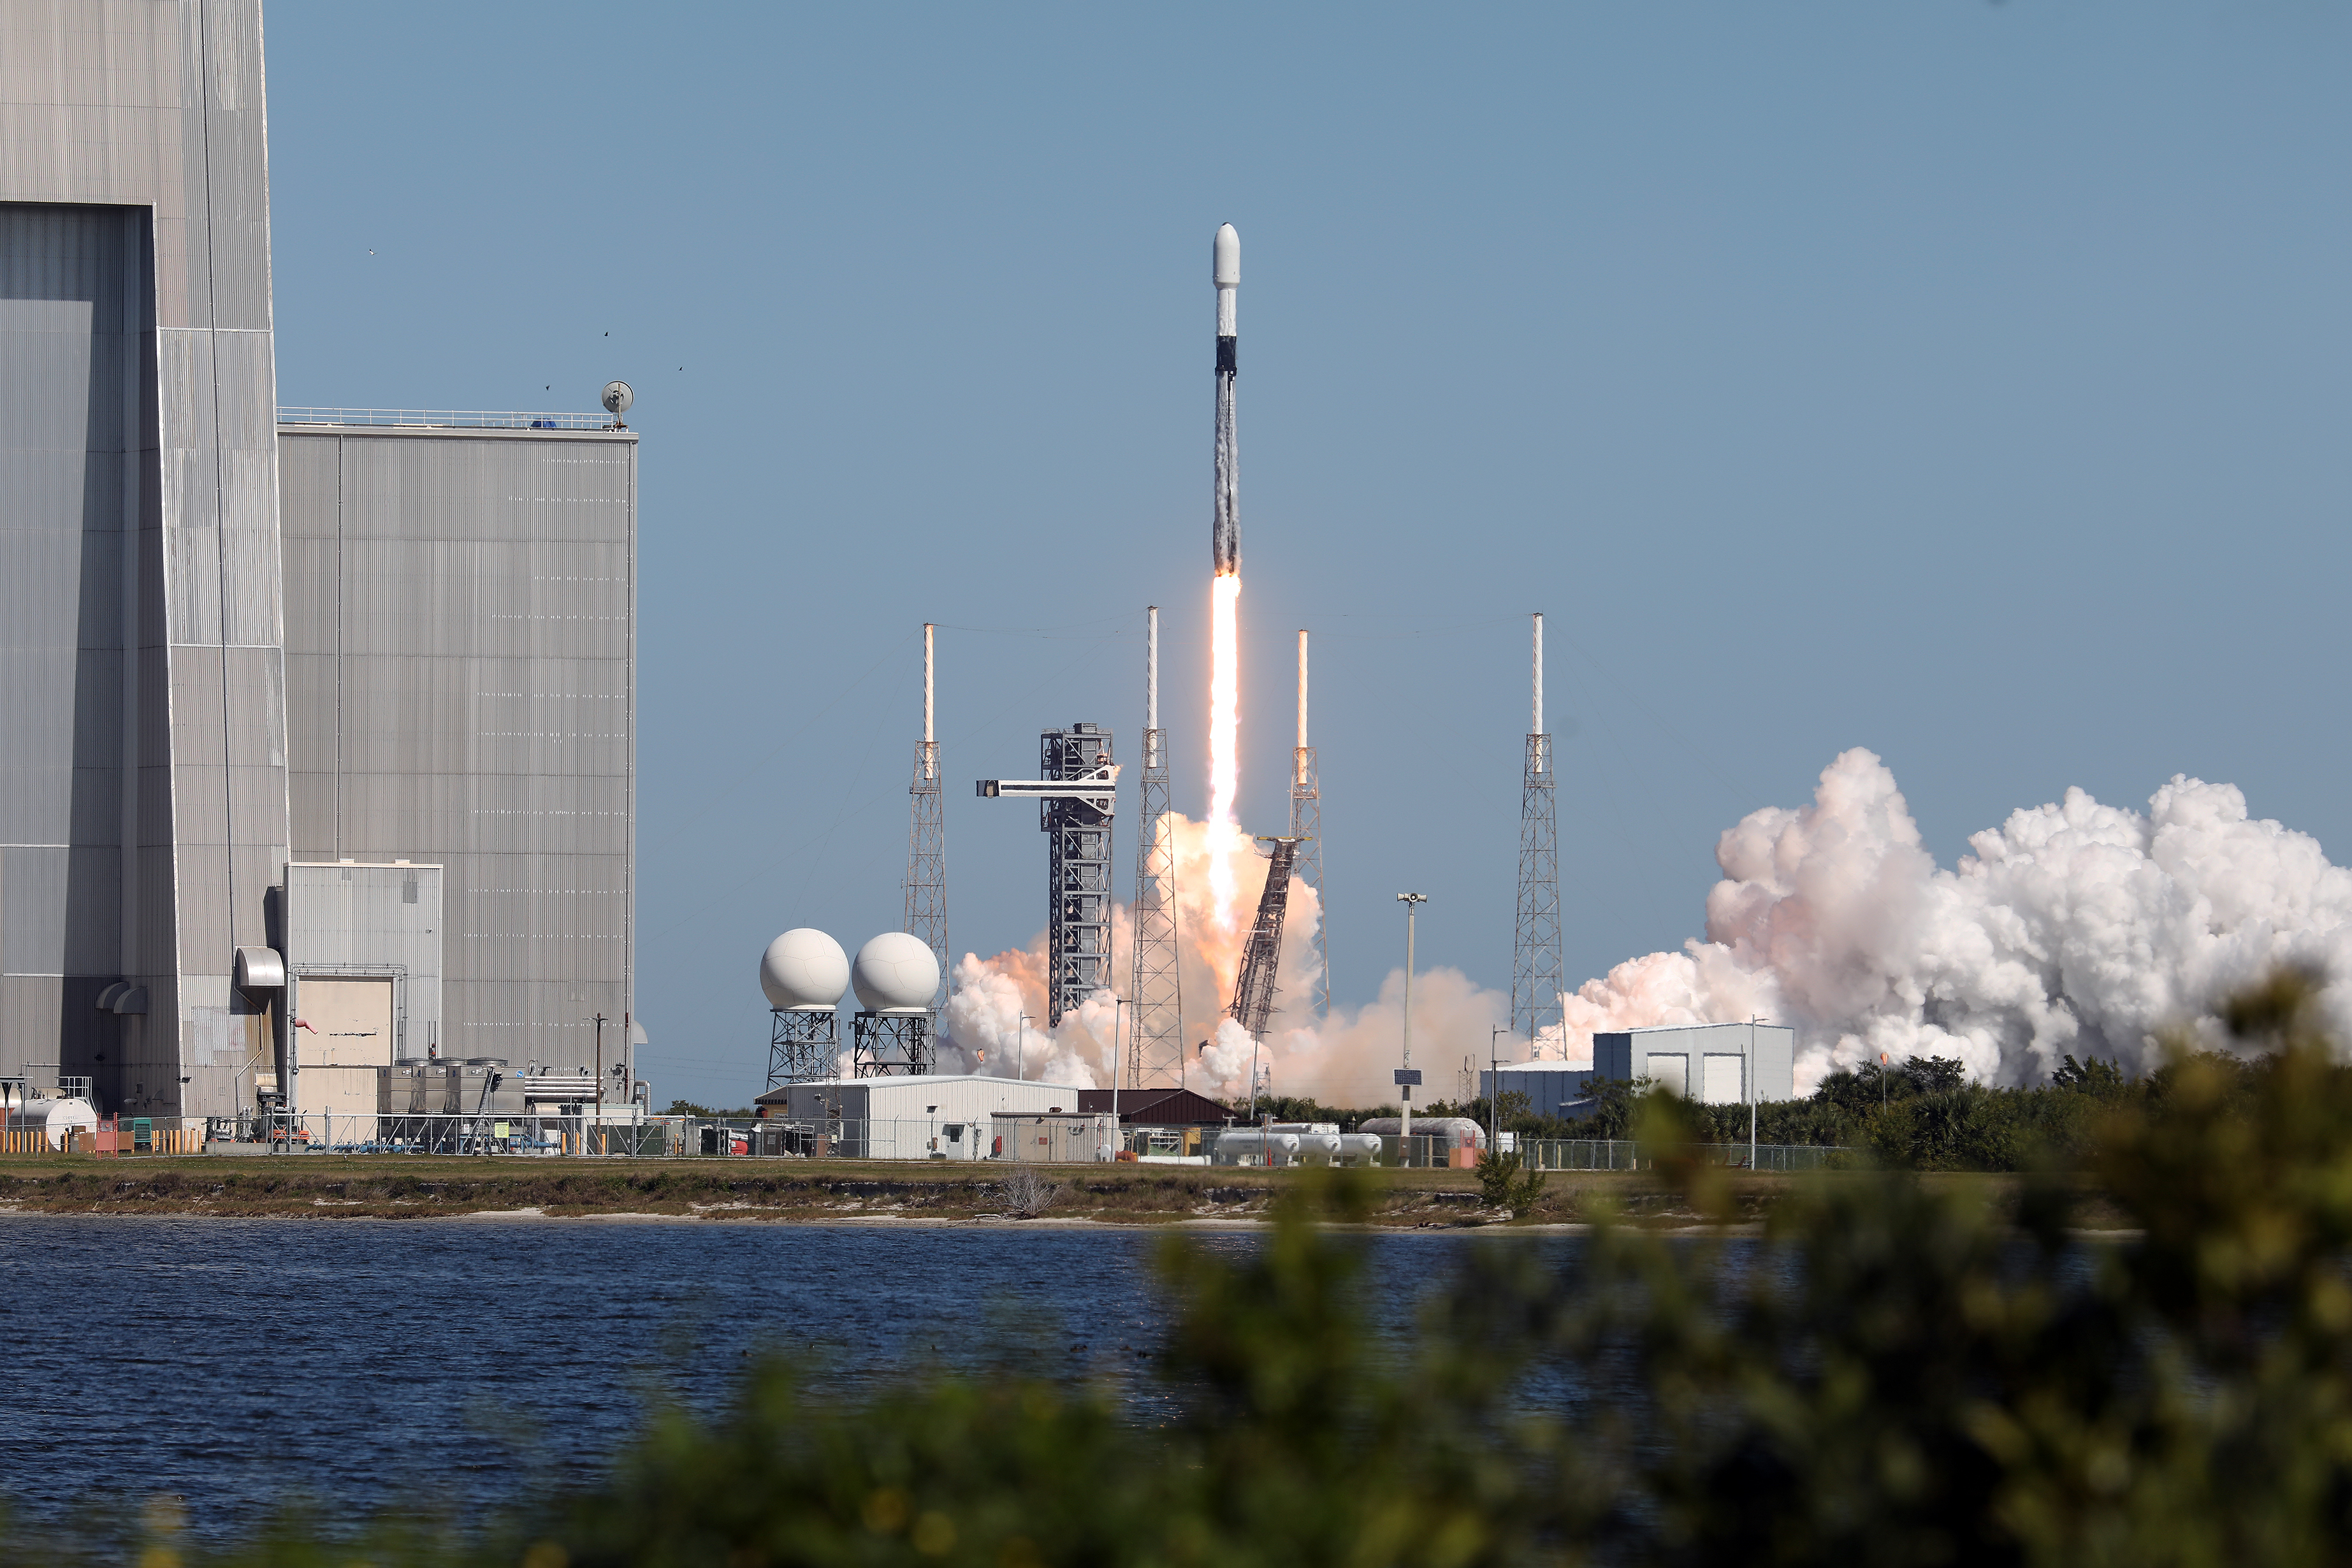 Northrop Grumman’s 20th Cargo Resupply Mission Successfully Launches to the International Space Station for NASA